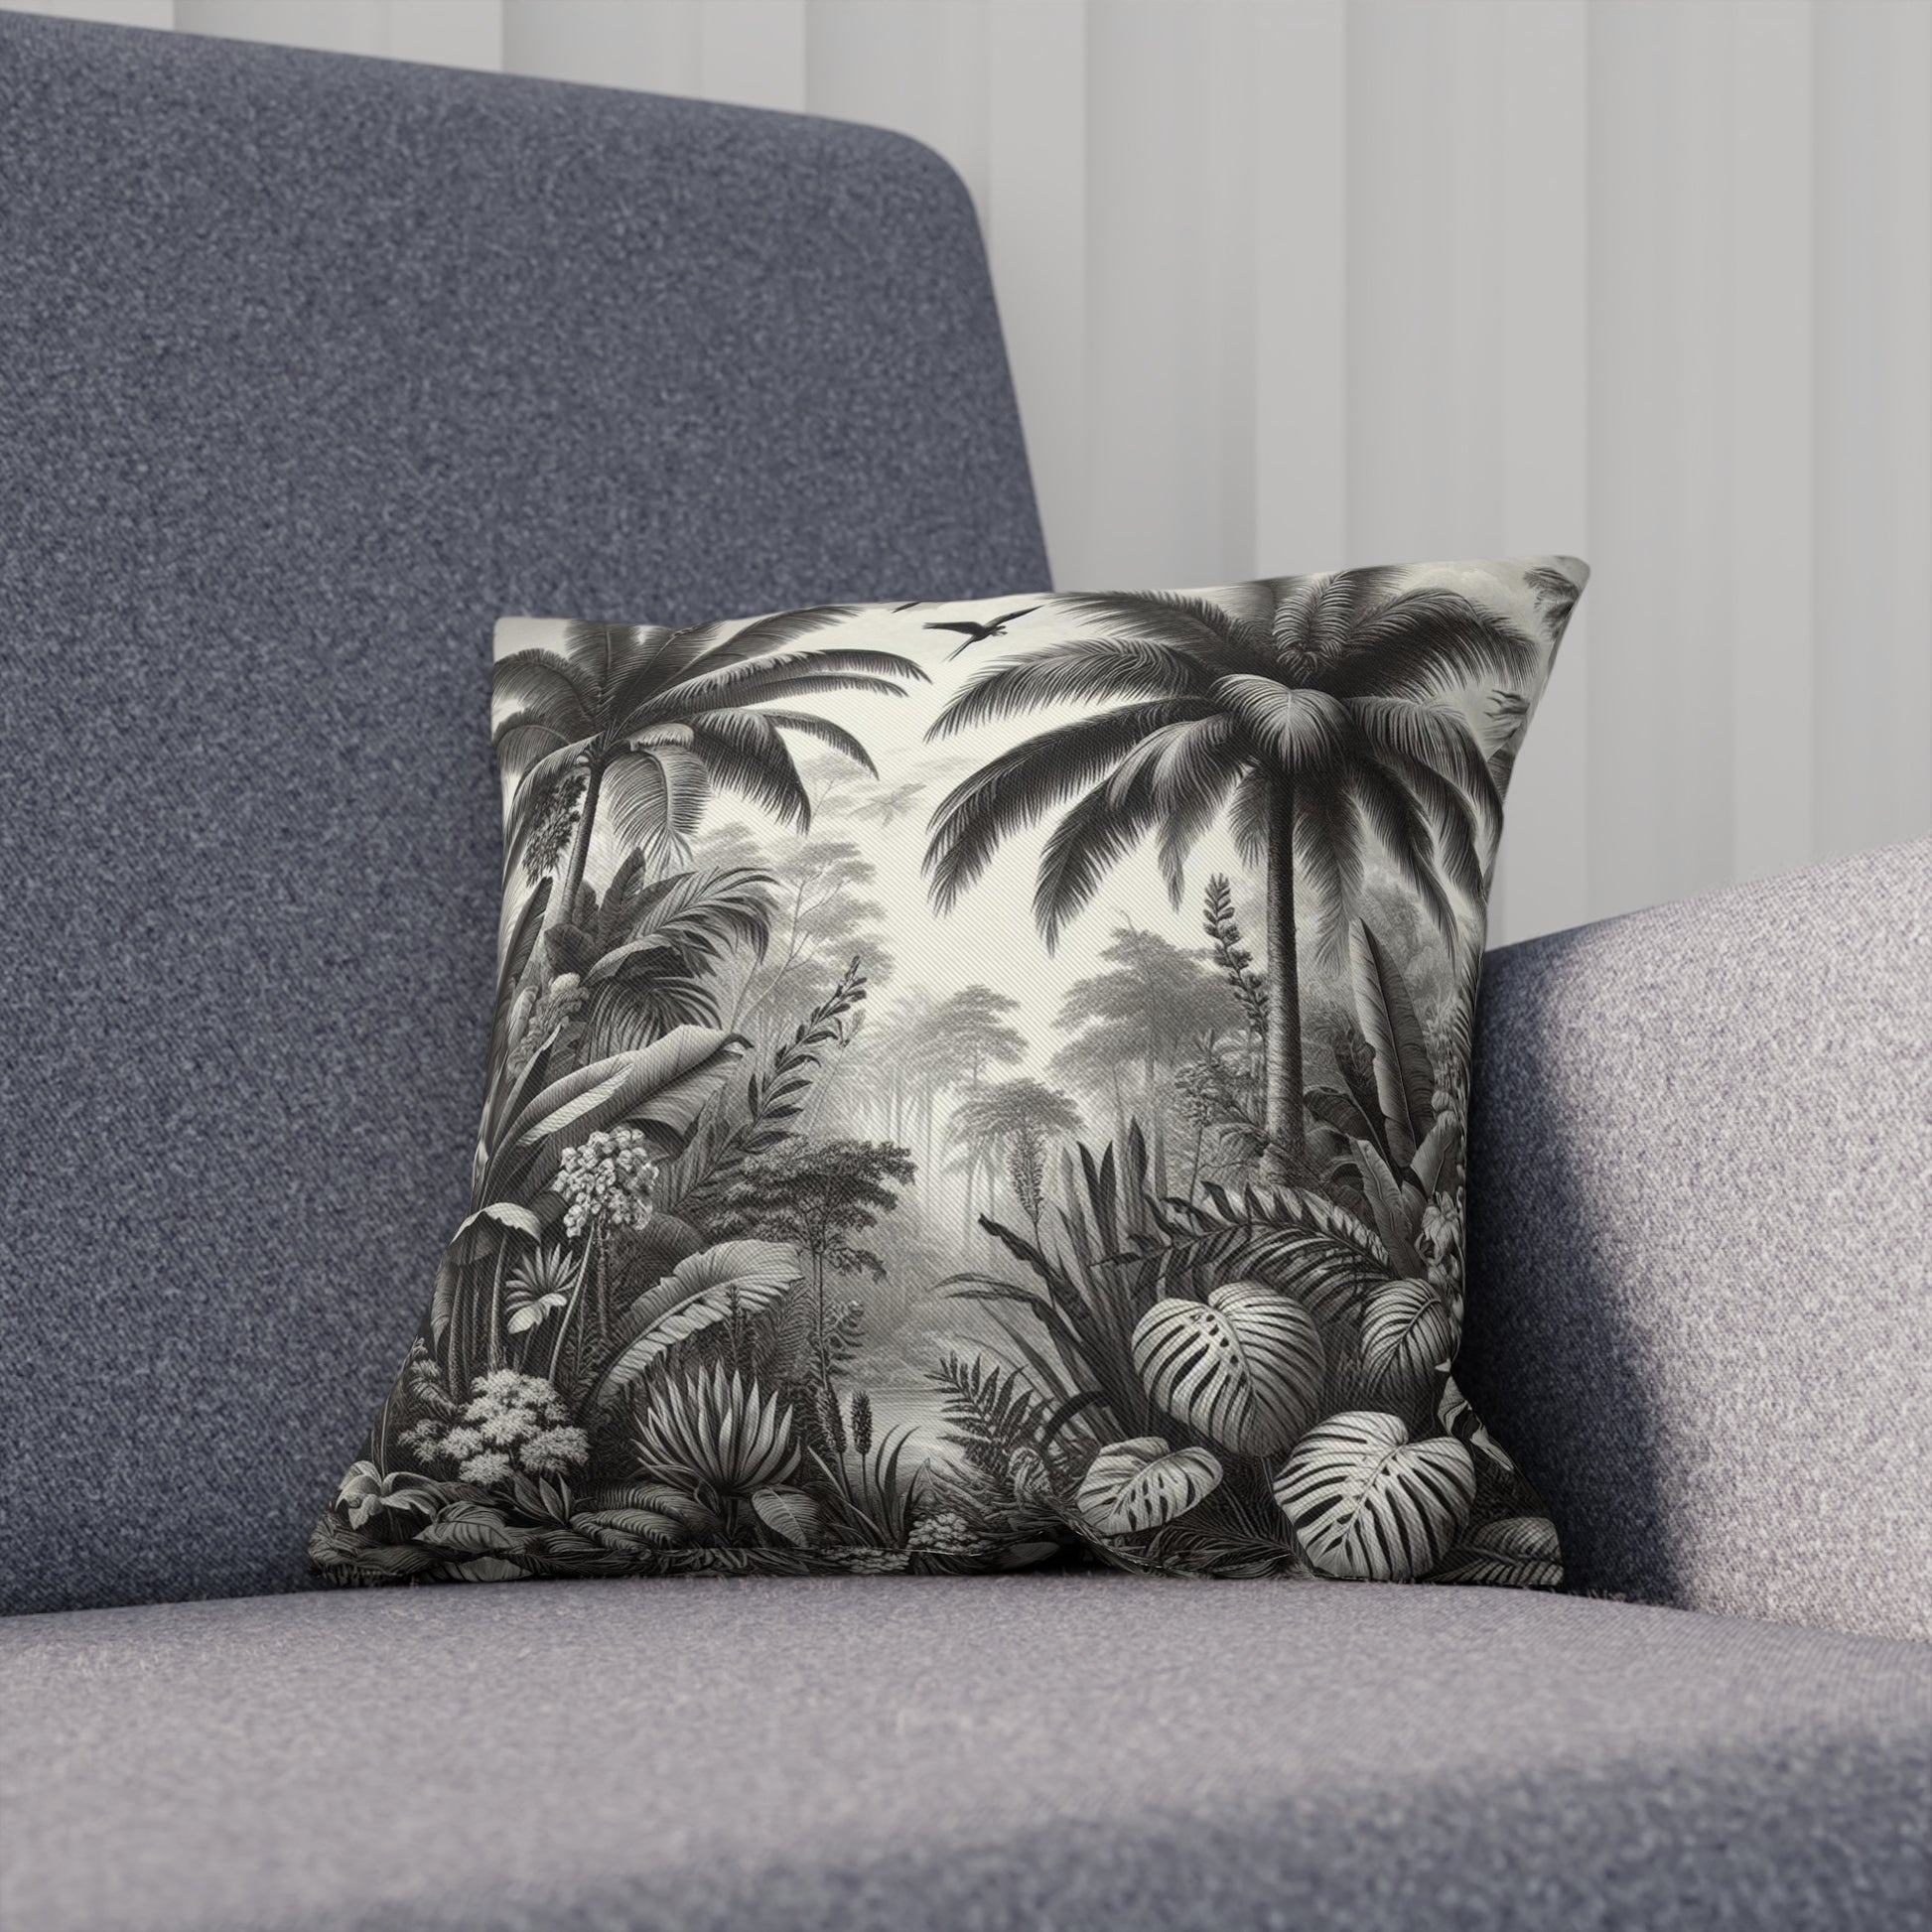 Vintage Botanical Black and White Maximalist Tropical Palm Tree Jungle Throw Pillow 100% Cotton Cushion Cover